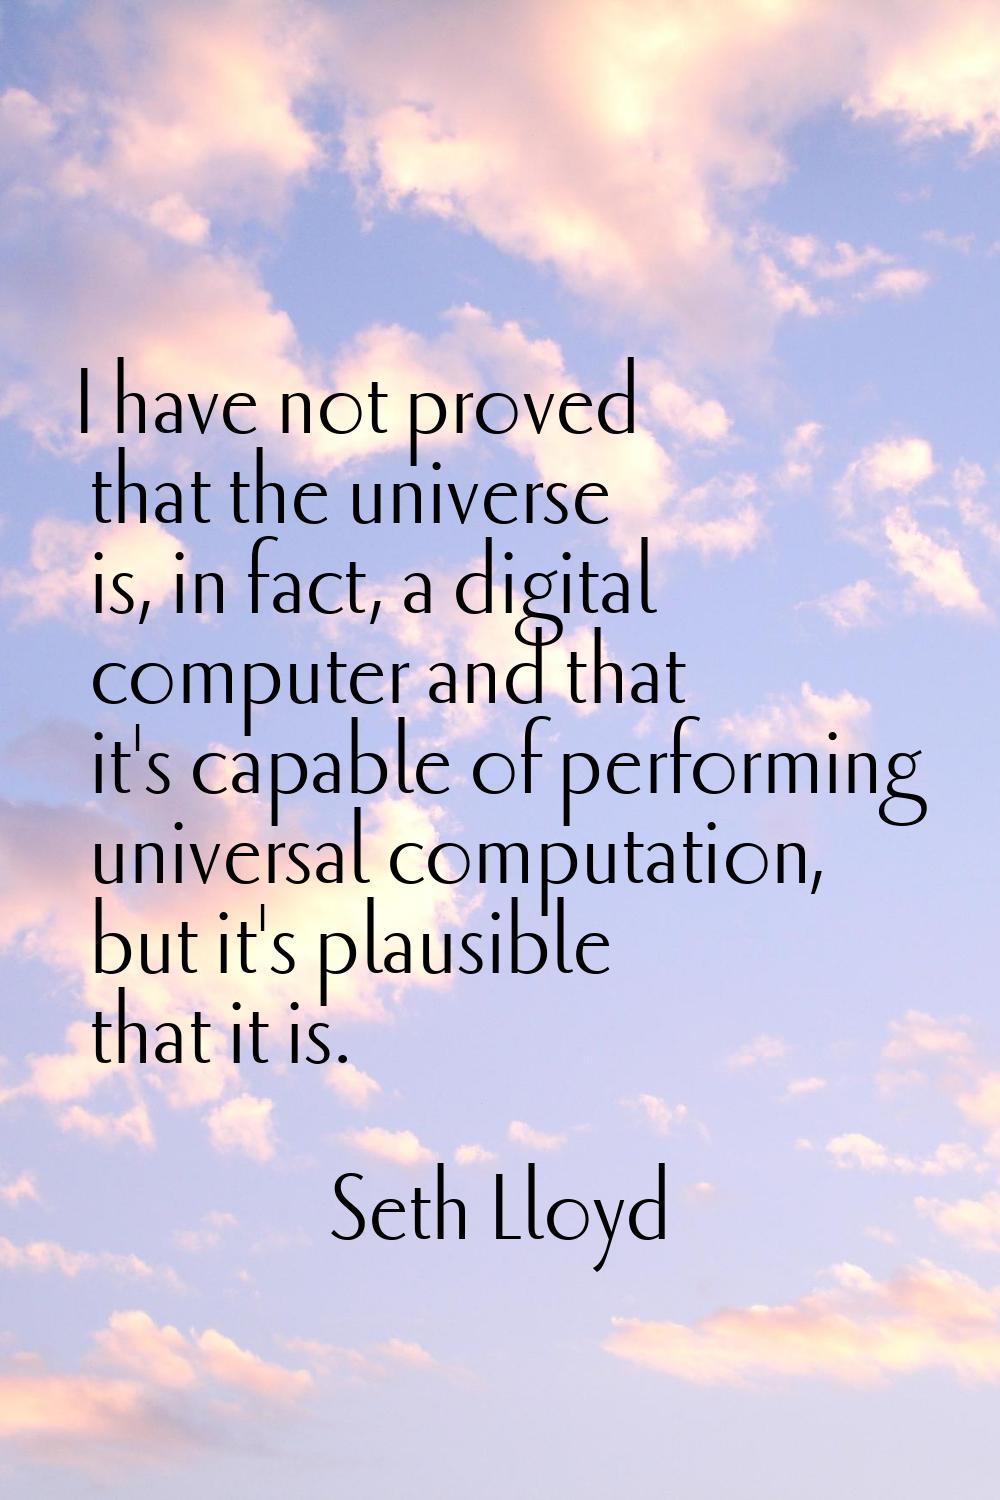 I have not proved that the universe is, in fact, a digital computer and that it's capable of perfor